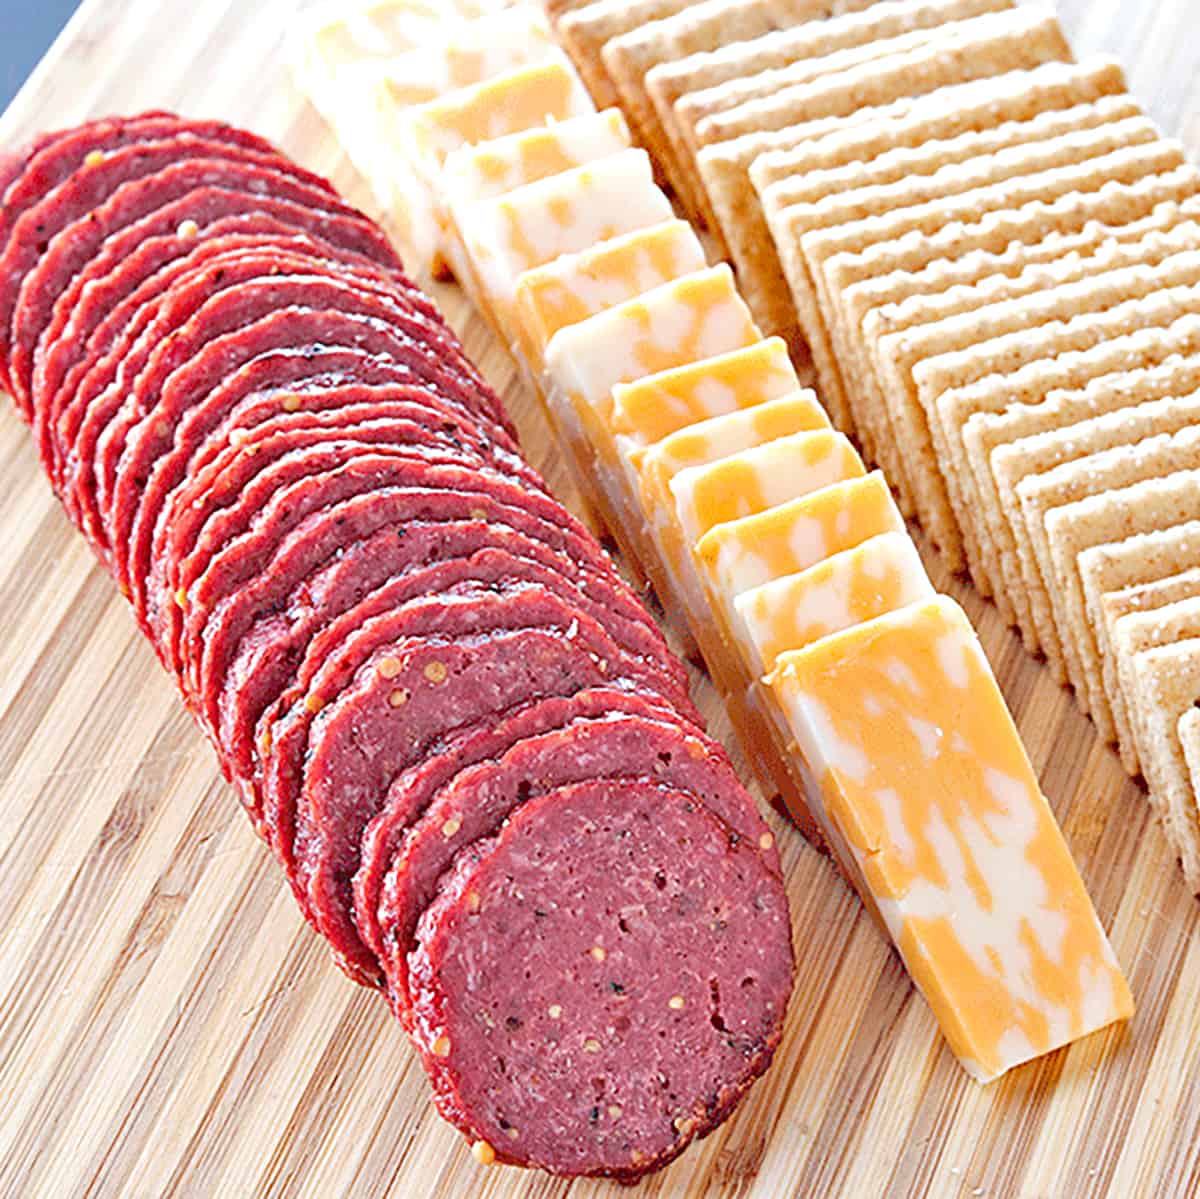 homemade beef summer sausage with cheese and crackers on a wooden cutting board